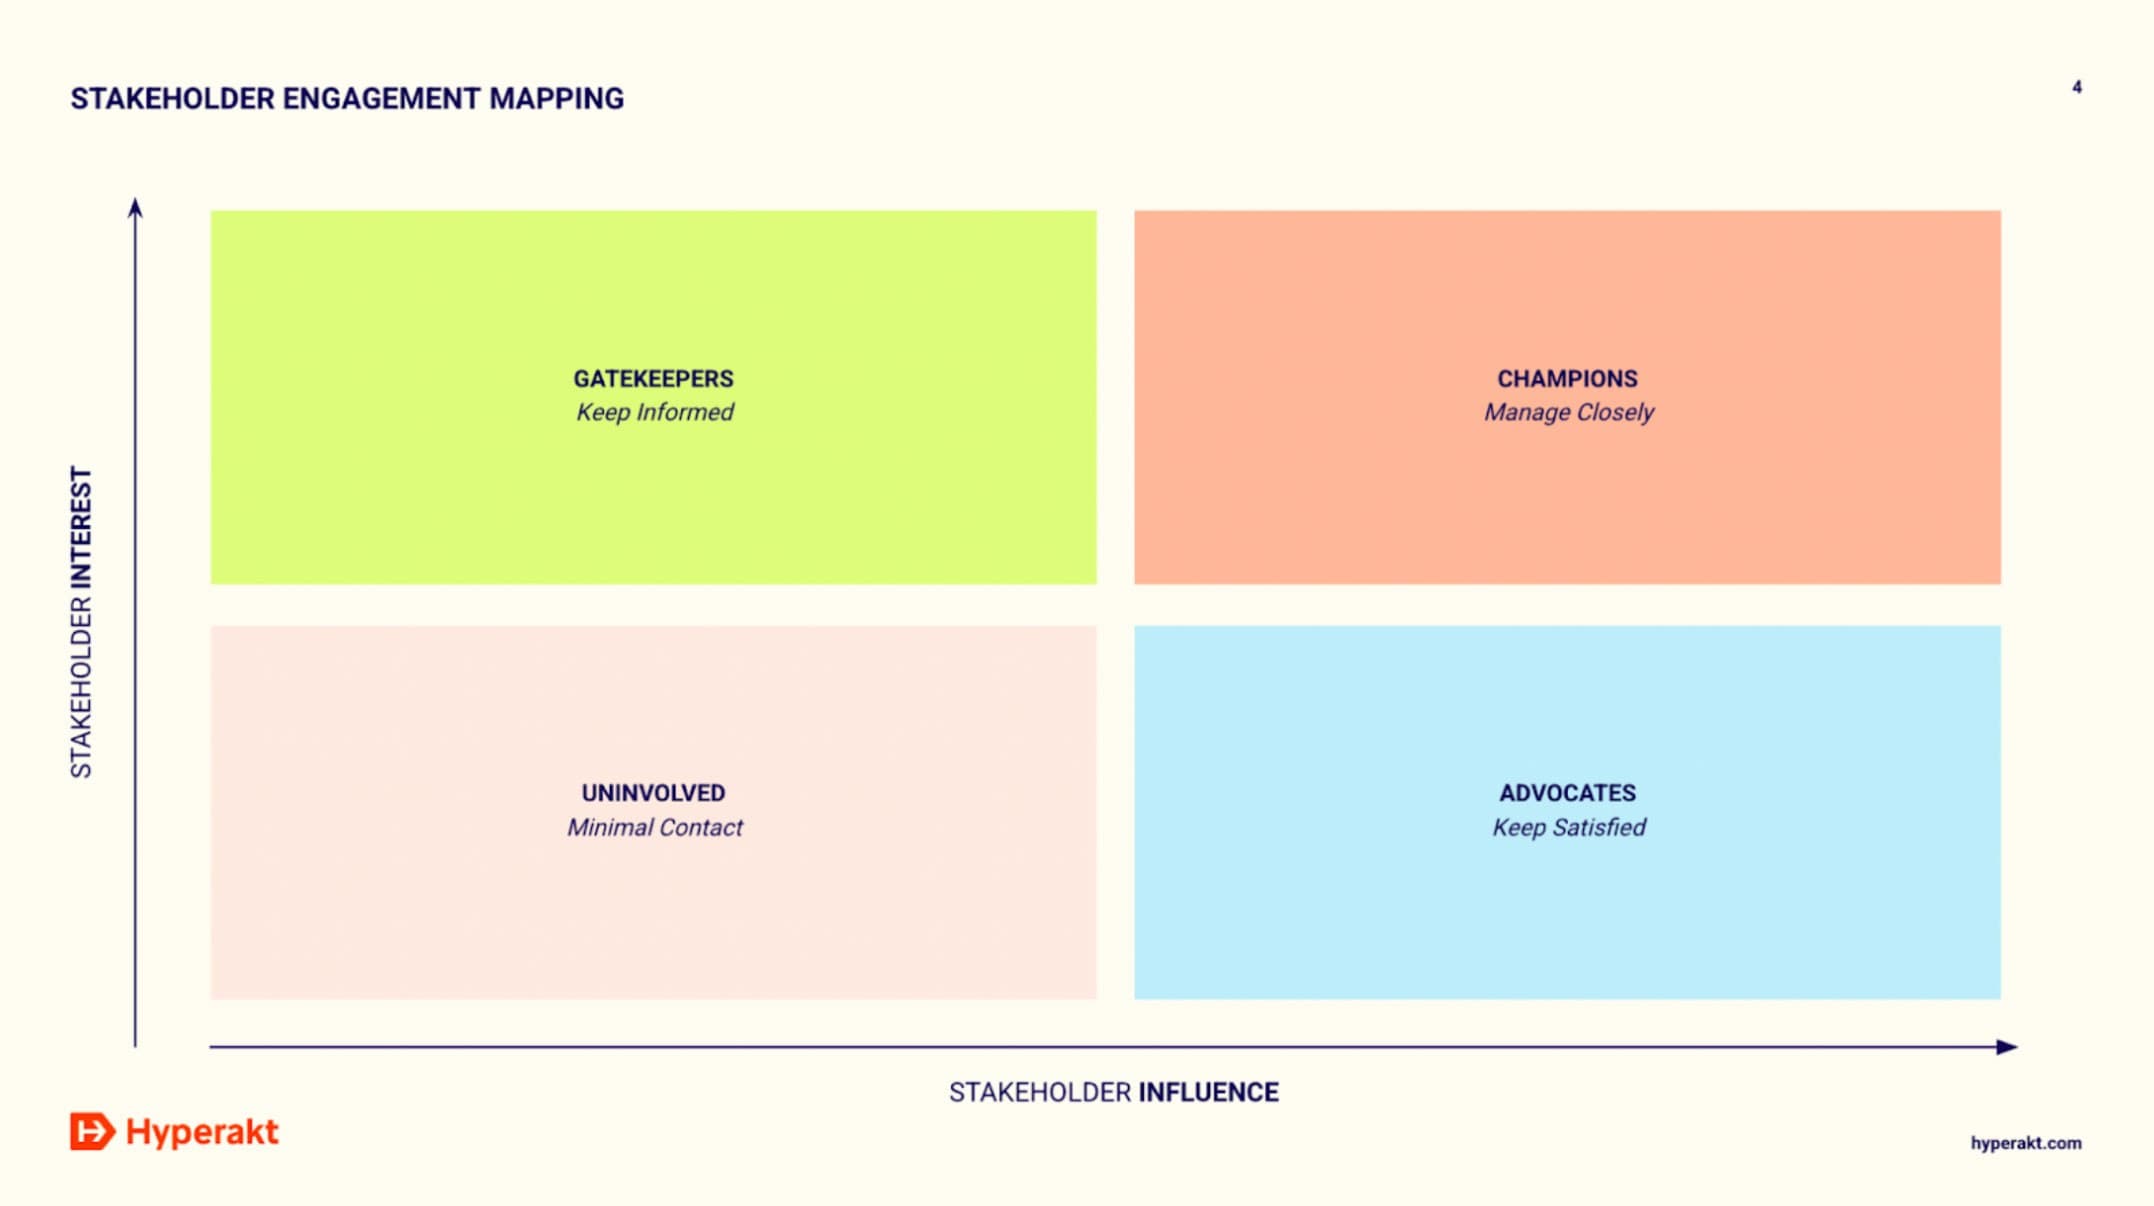 A stakeholder engagement mapping chart with four quadrants titled: Gatekeepers (Keep Informed), Champions (Manage Closely), Uninvolved (Minimal Contact), and Advocates (Keep Satisfied). The x-axis represents stakeholder influence and the y-axis represents stakeholder interest.